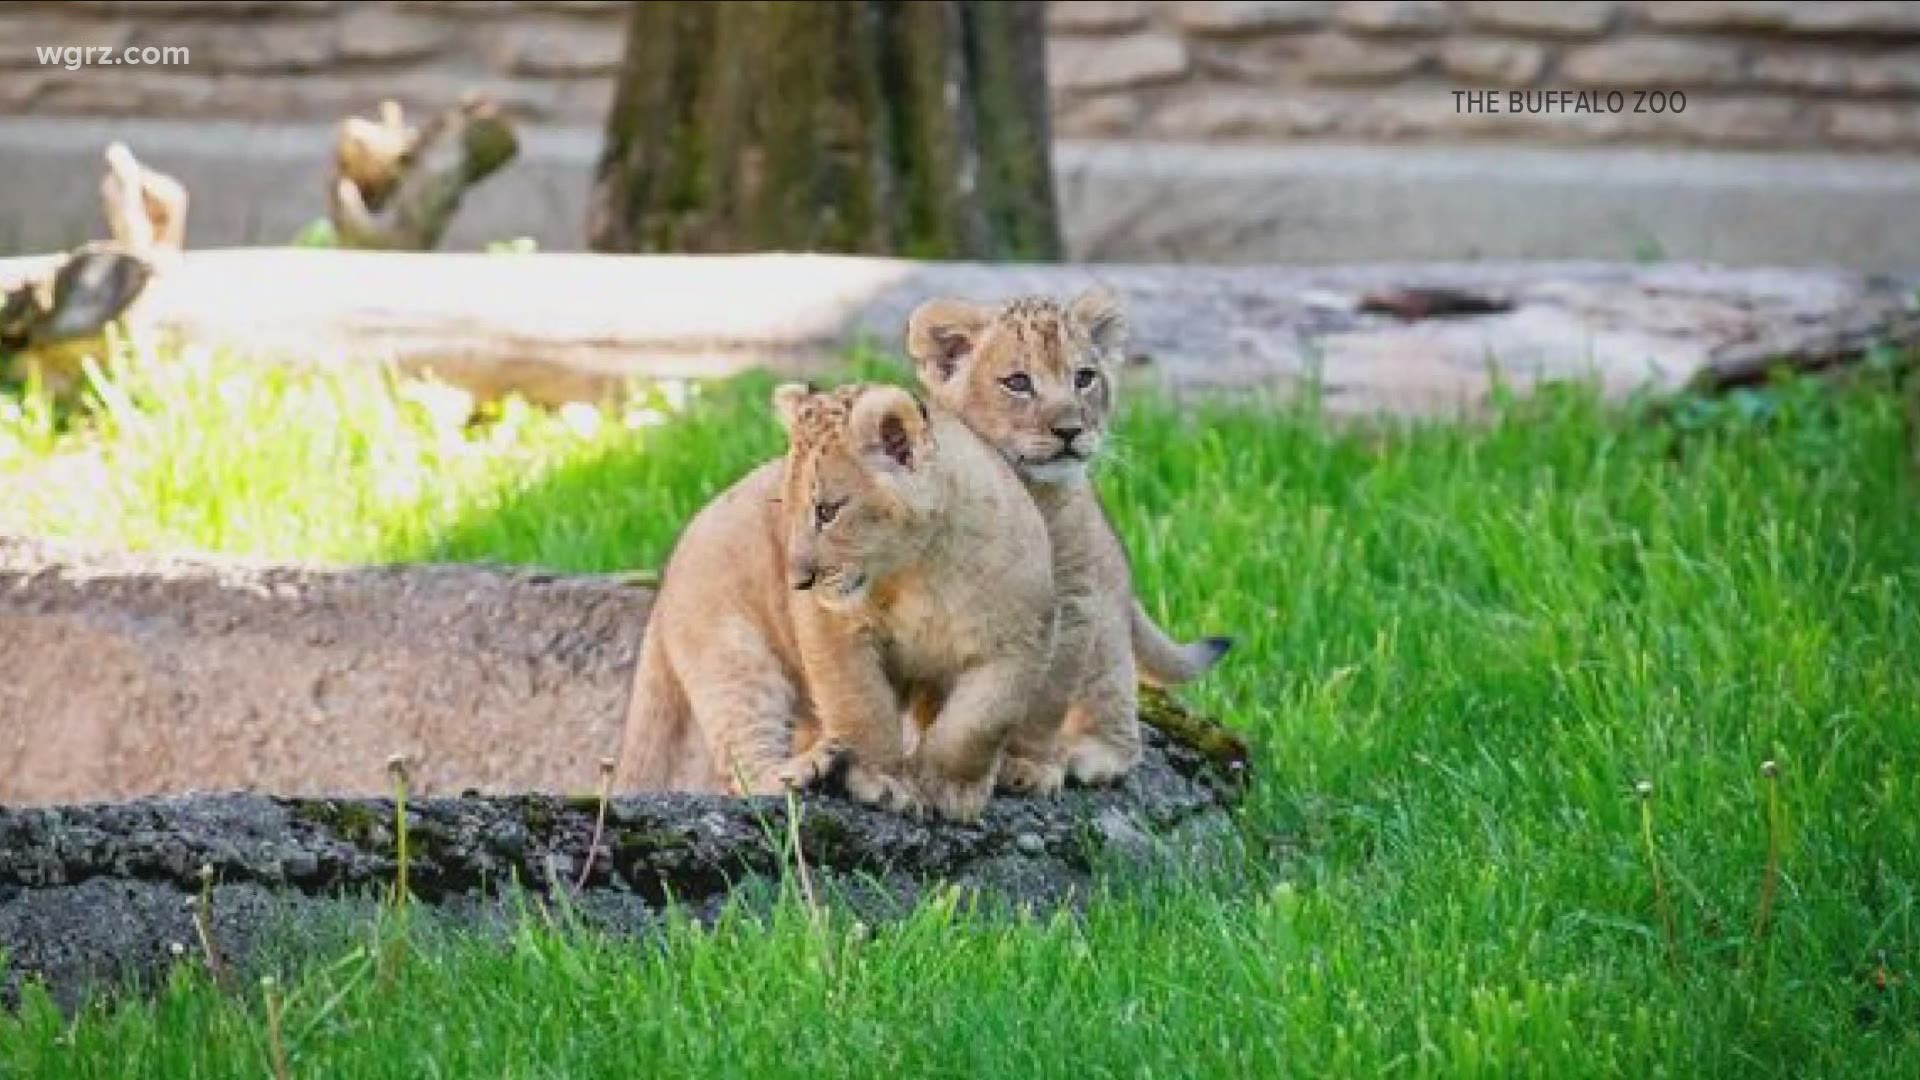 Naming contest for Buffalo Zoo's lion cubs